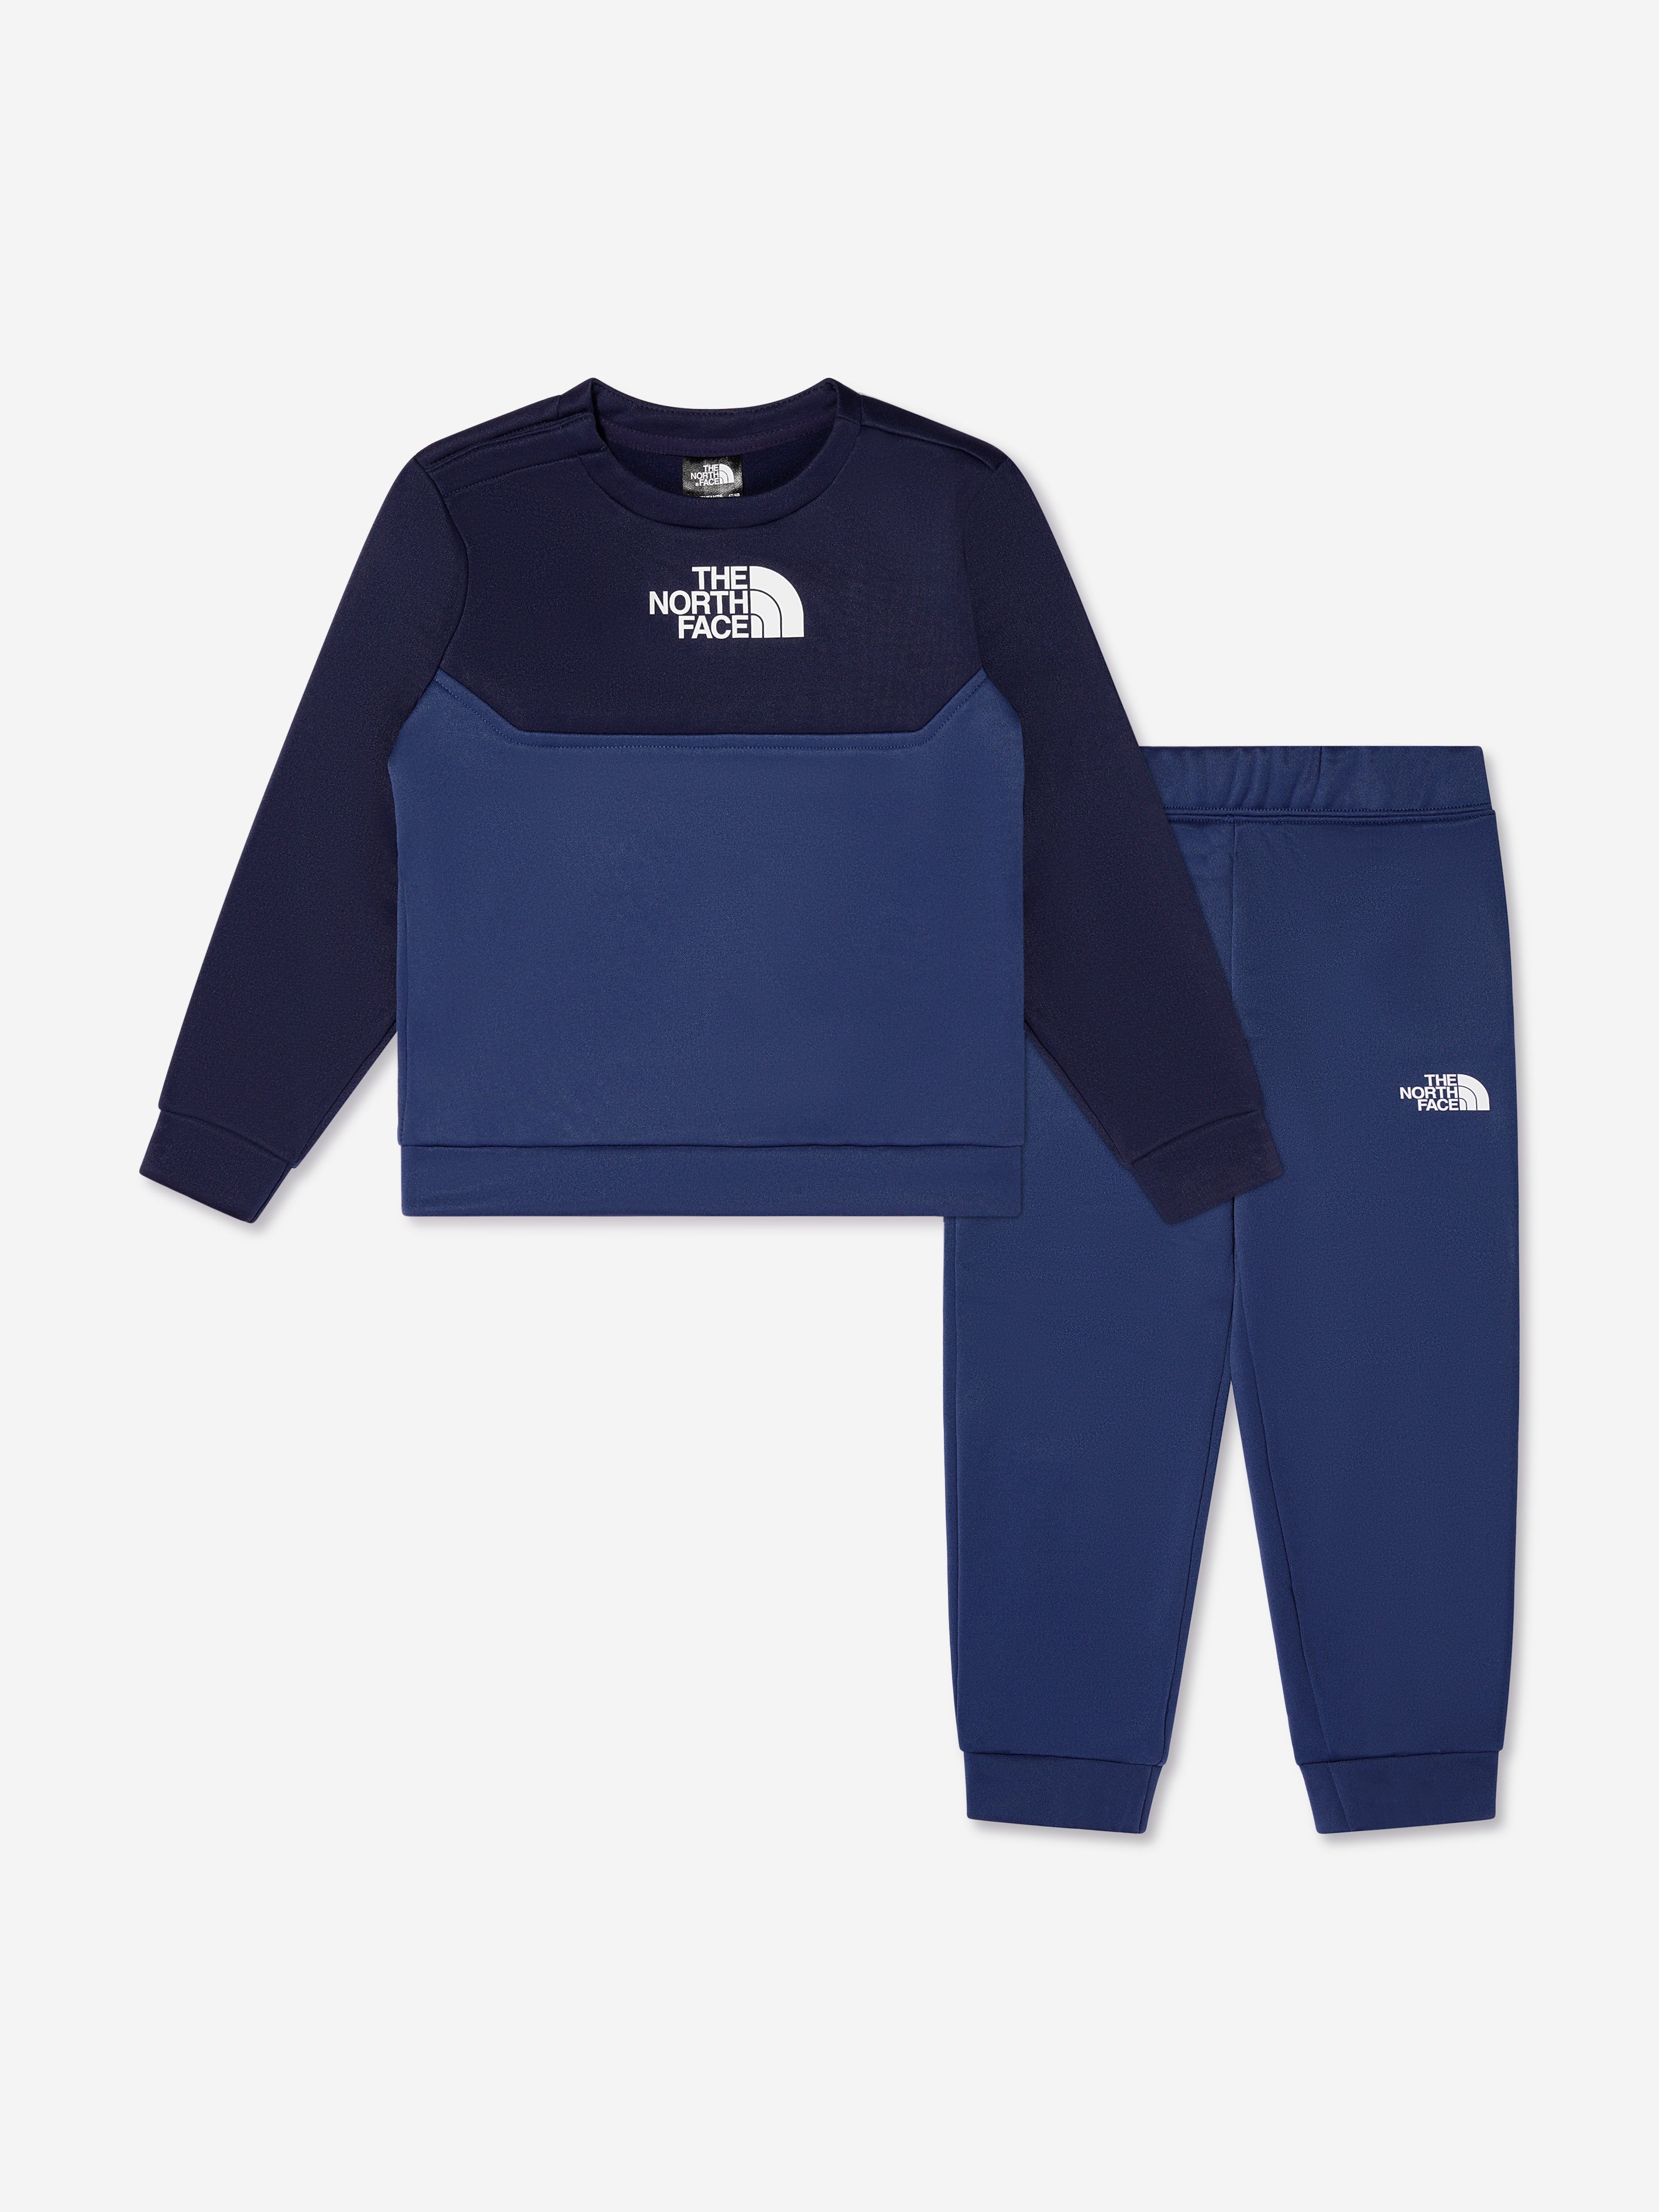 The North Face Surgent Tracksuit | lupon.gov.ph